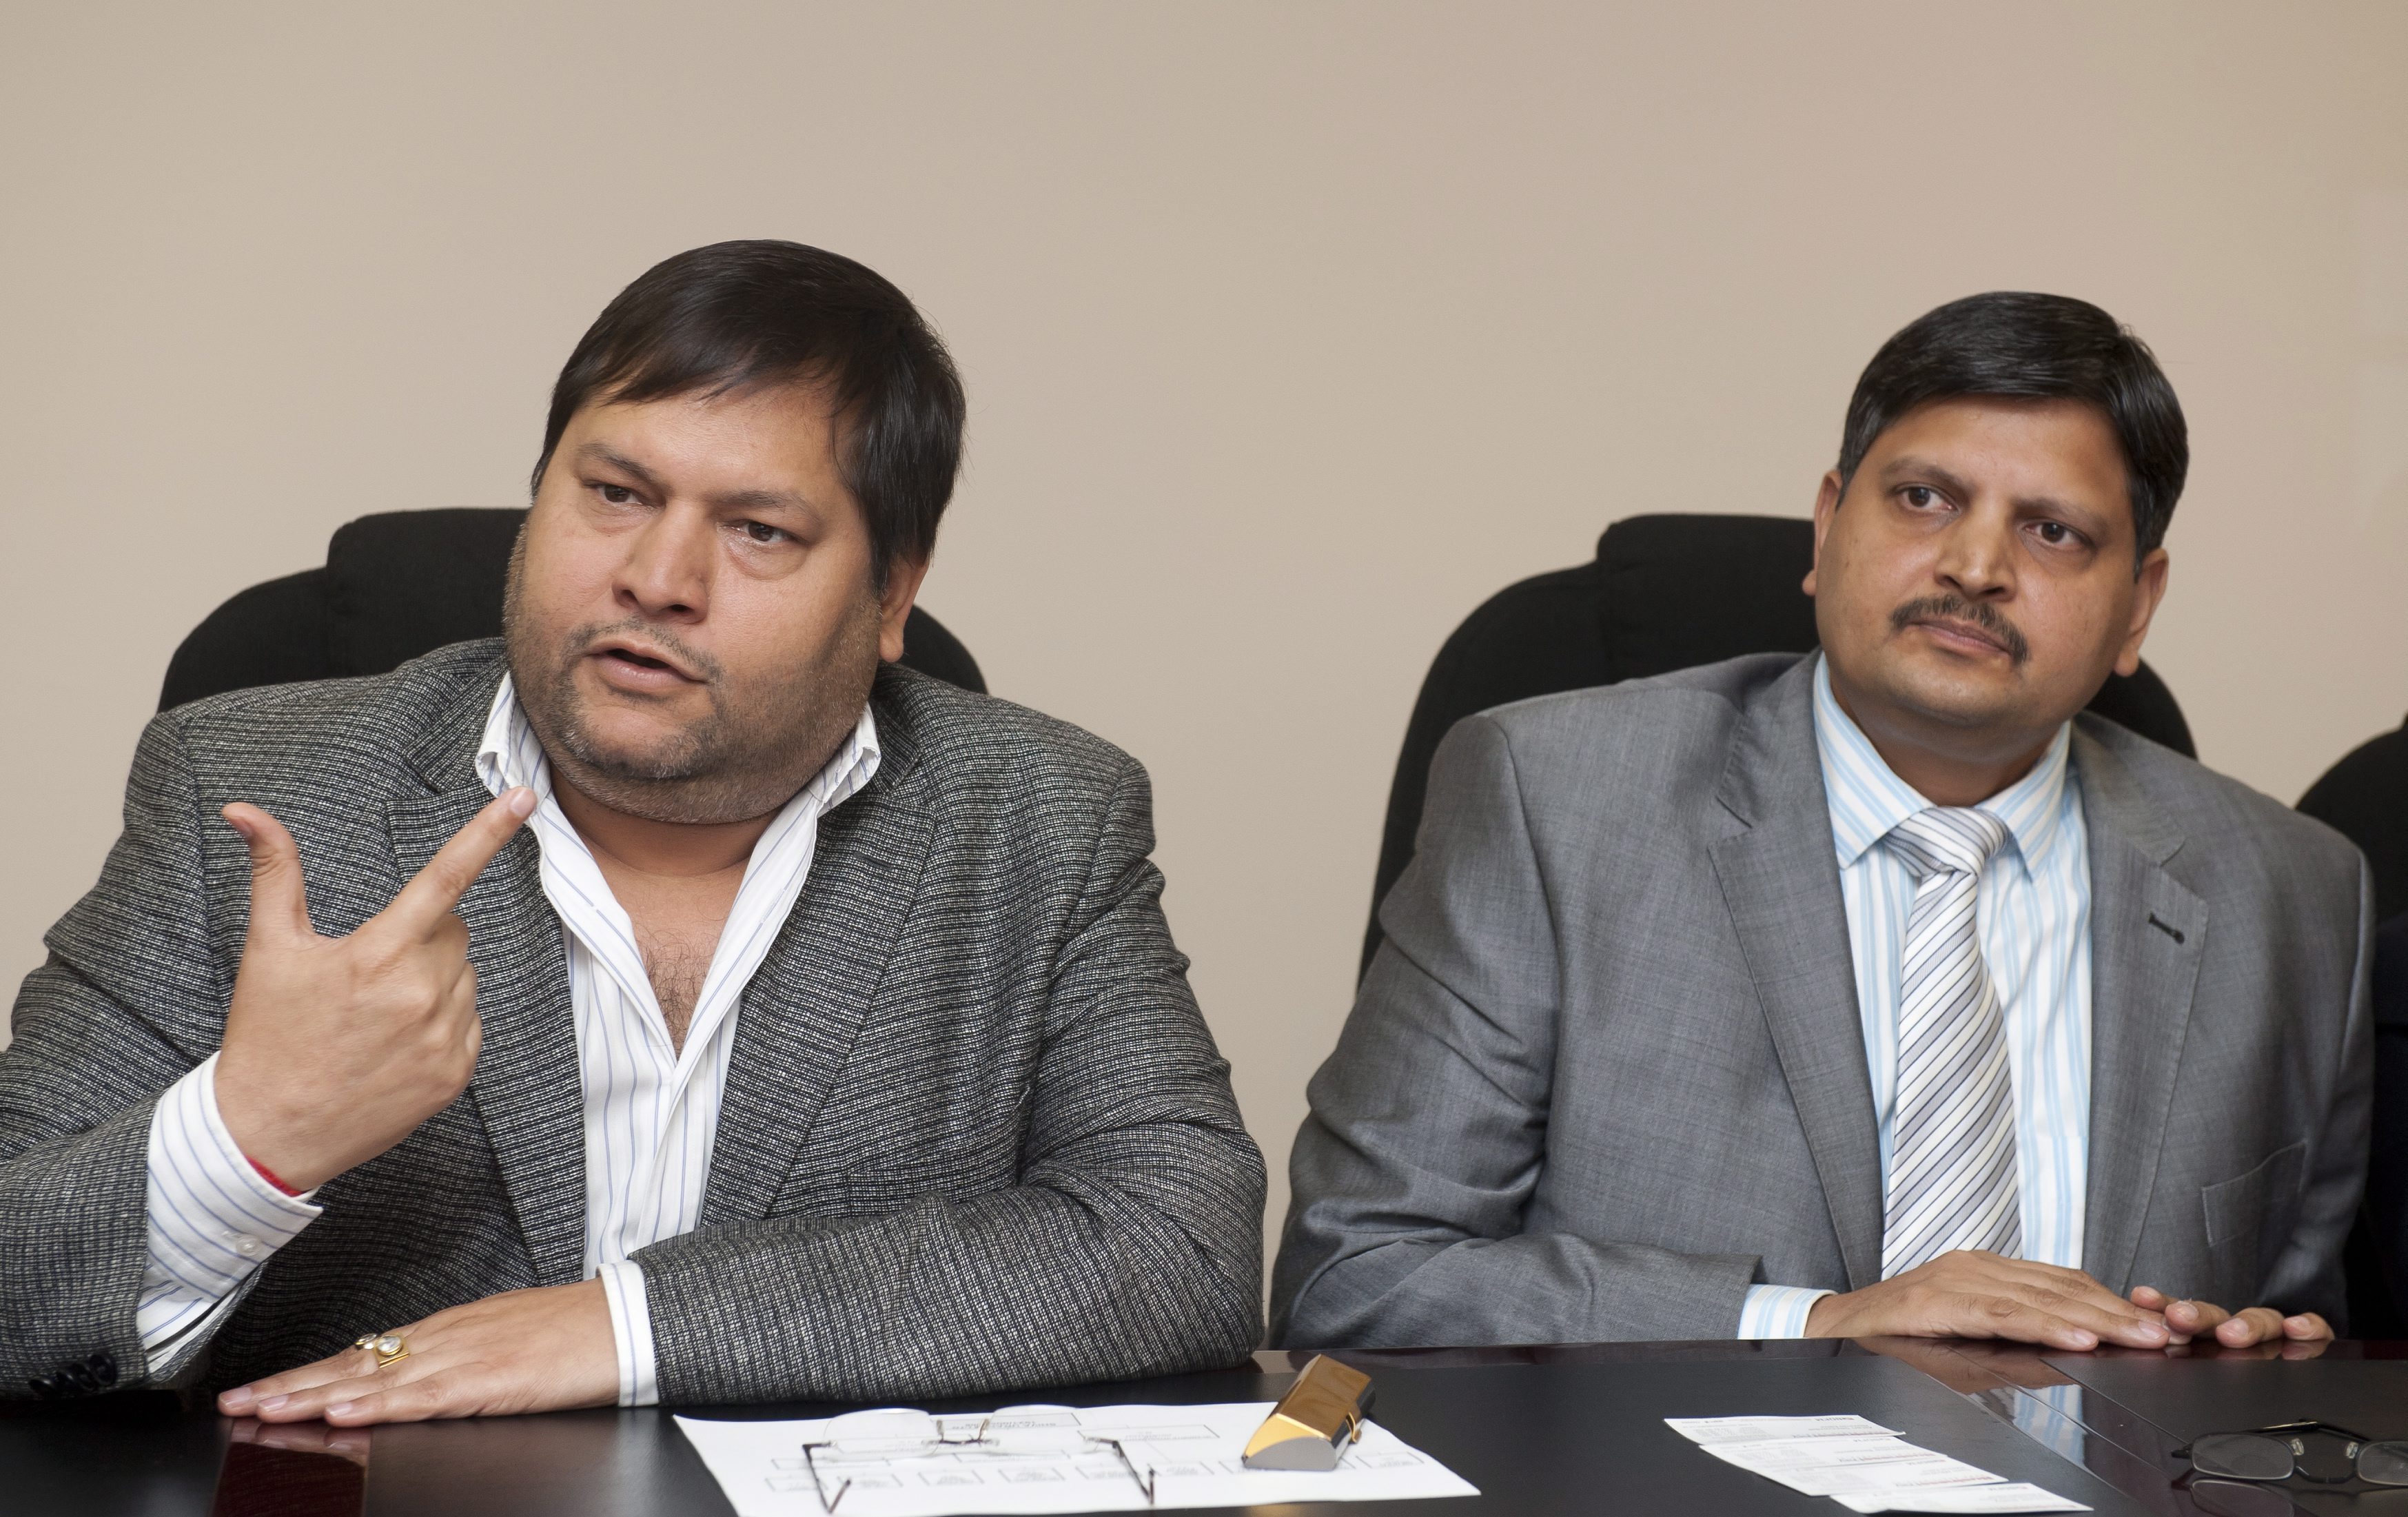 Indian businessmen Ajay Gupta, right, and younger brother Atul Gupta in Johannesburg on March 2, 2011 (Gallo Images/Getty Images)